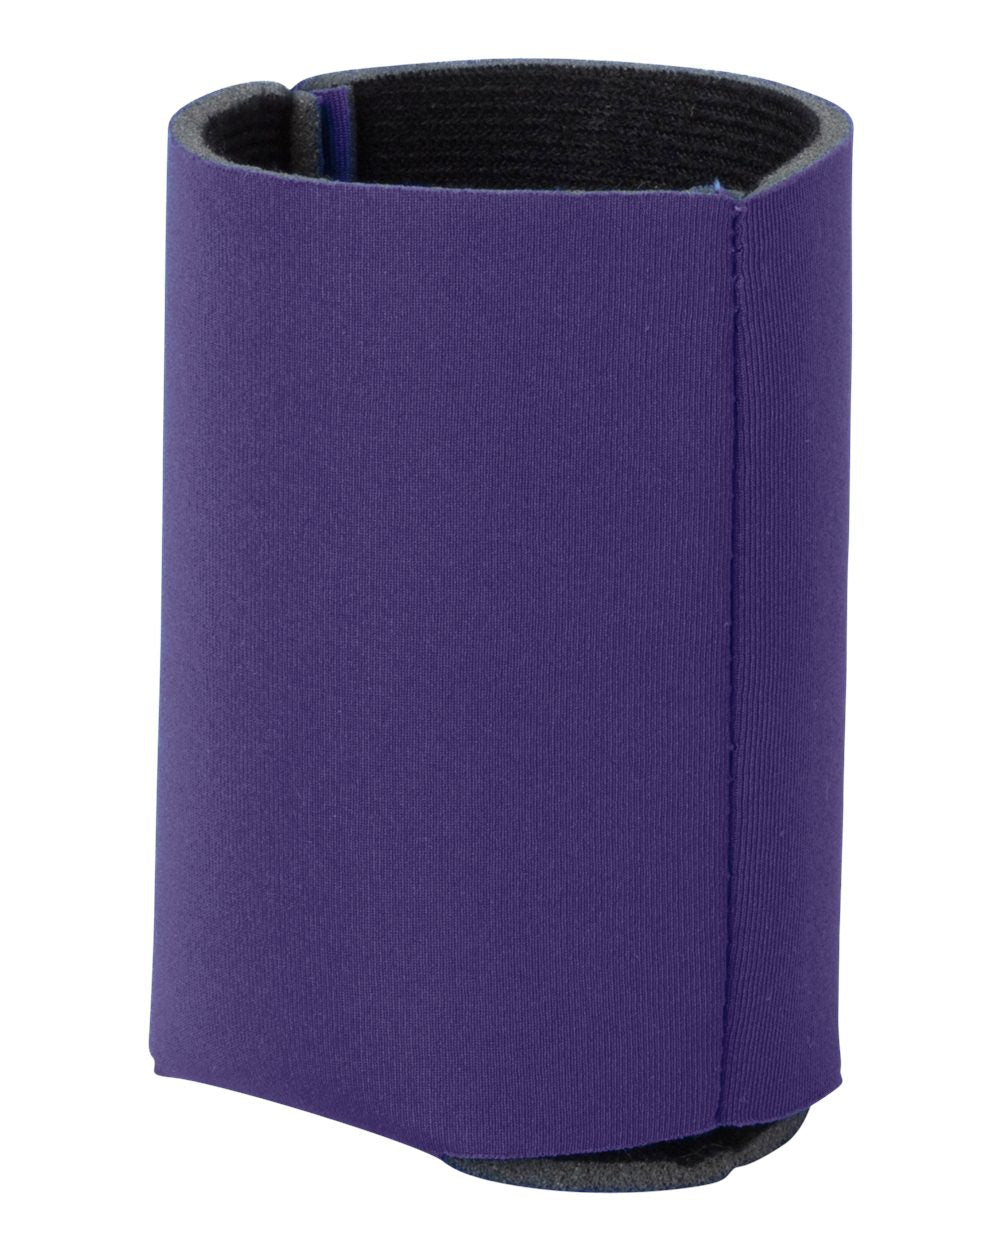 Liberty Bags - Can Holder (koozie) - FT001